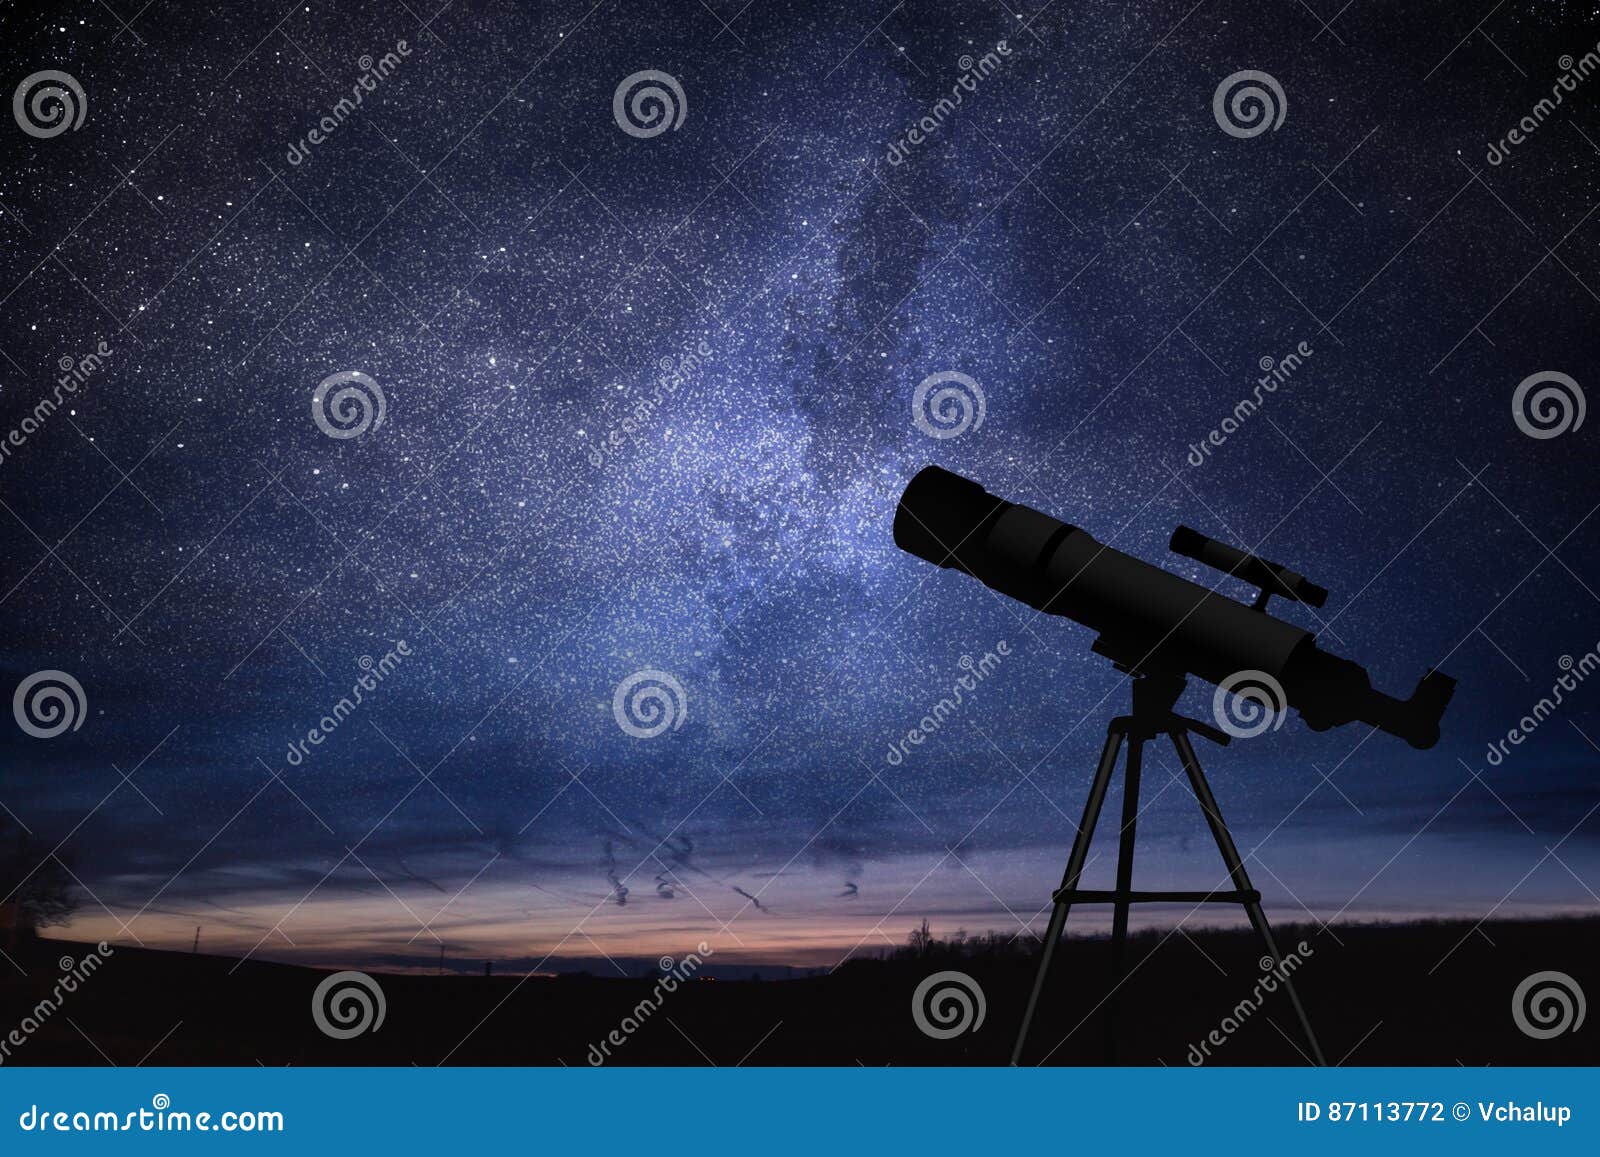 silhouette of telescope and starry night sky in background. astronomy and stars observing.